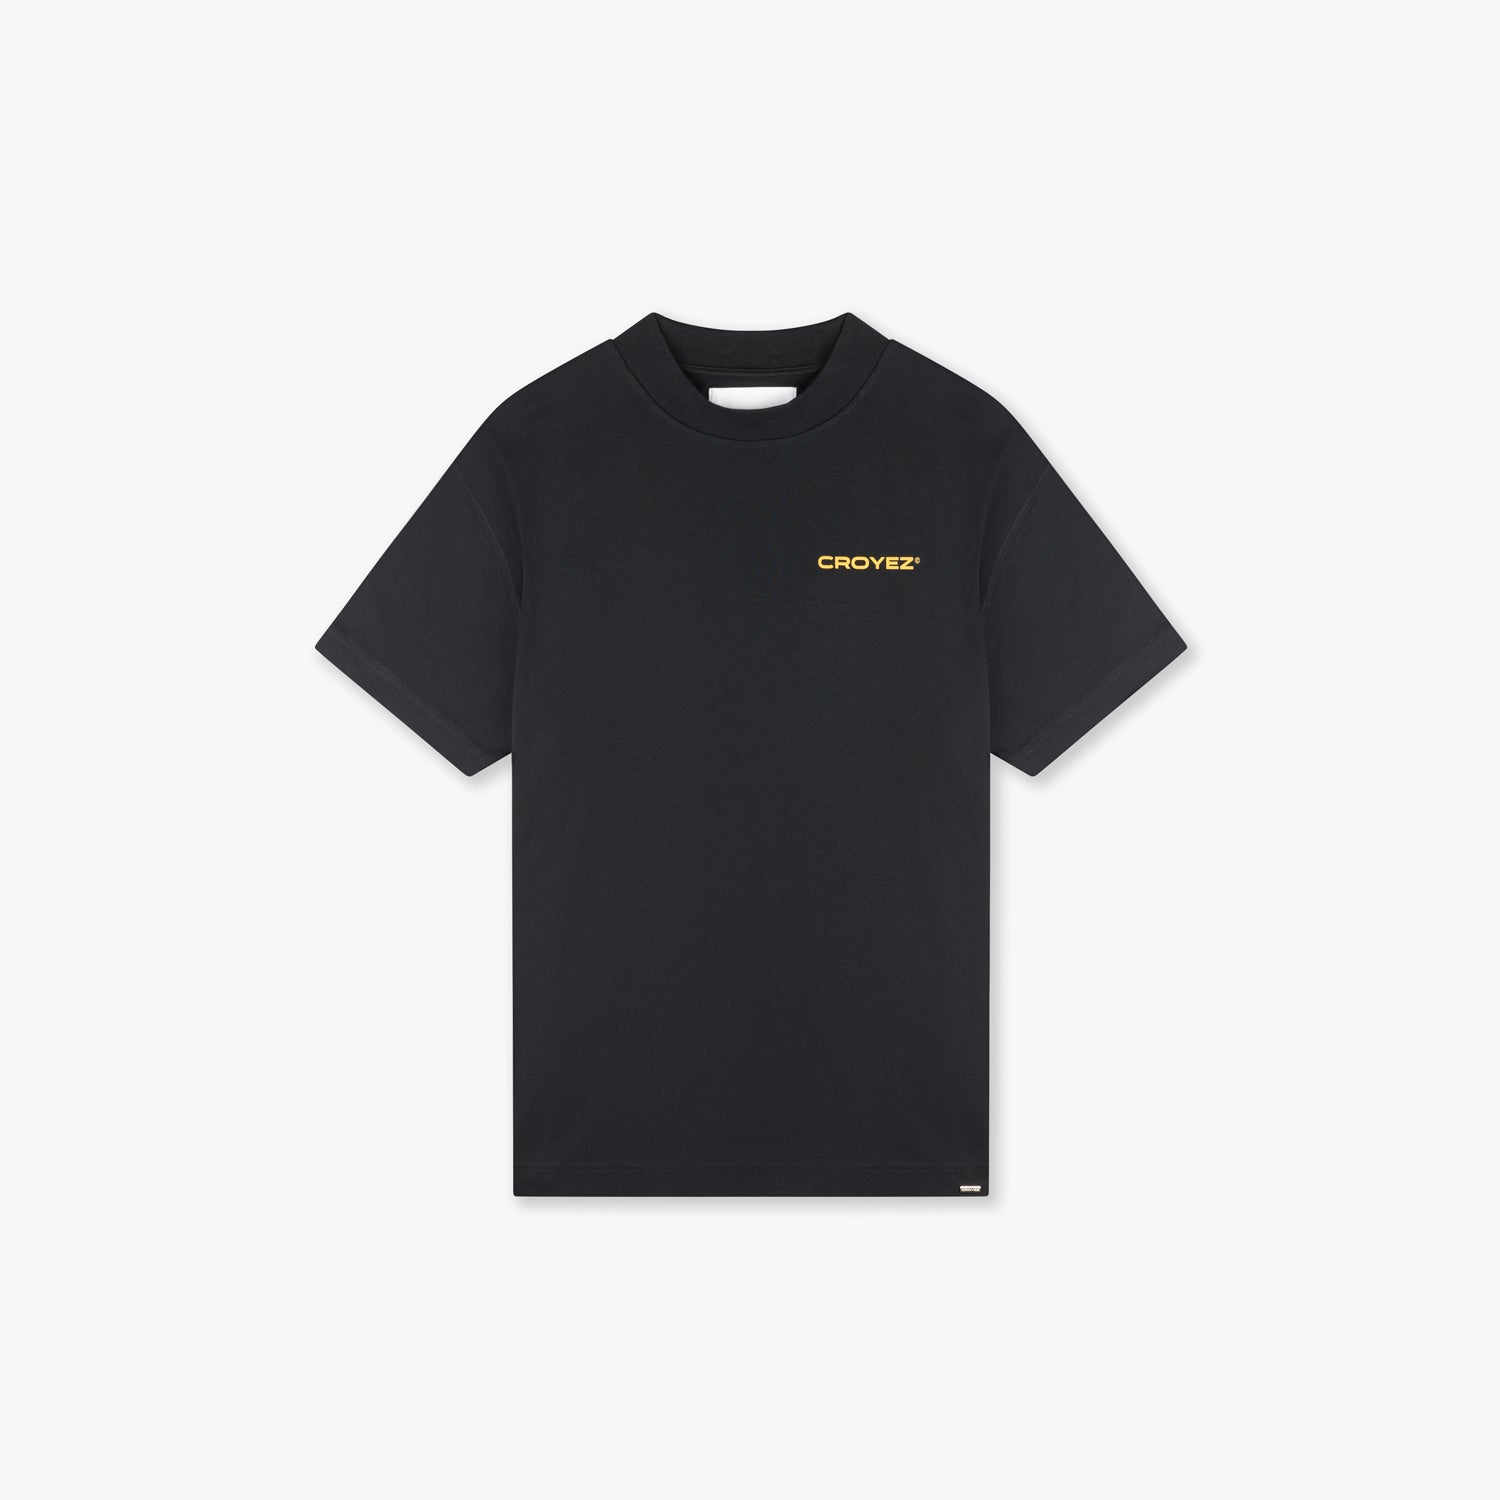 CROYEZ FAMILY OWNED BUSINESS T-SHIRT - BLACK/YELLOW